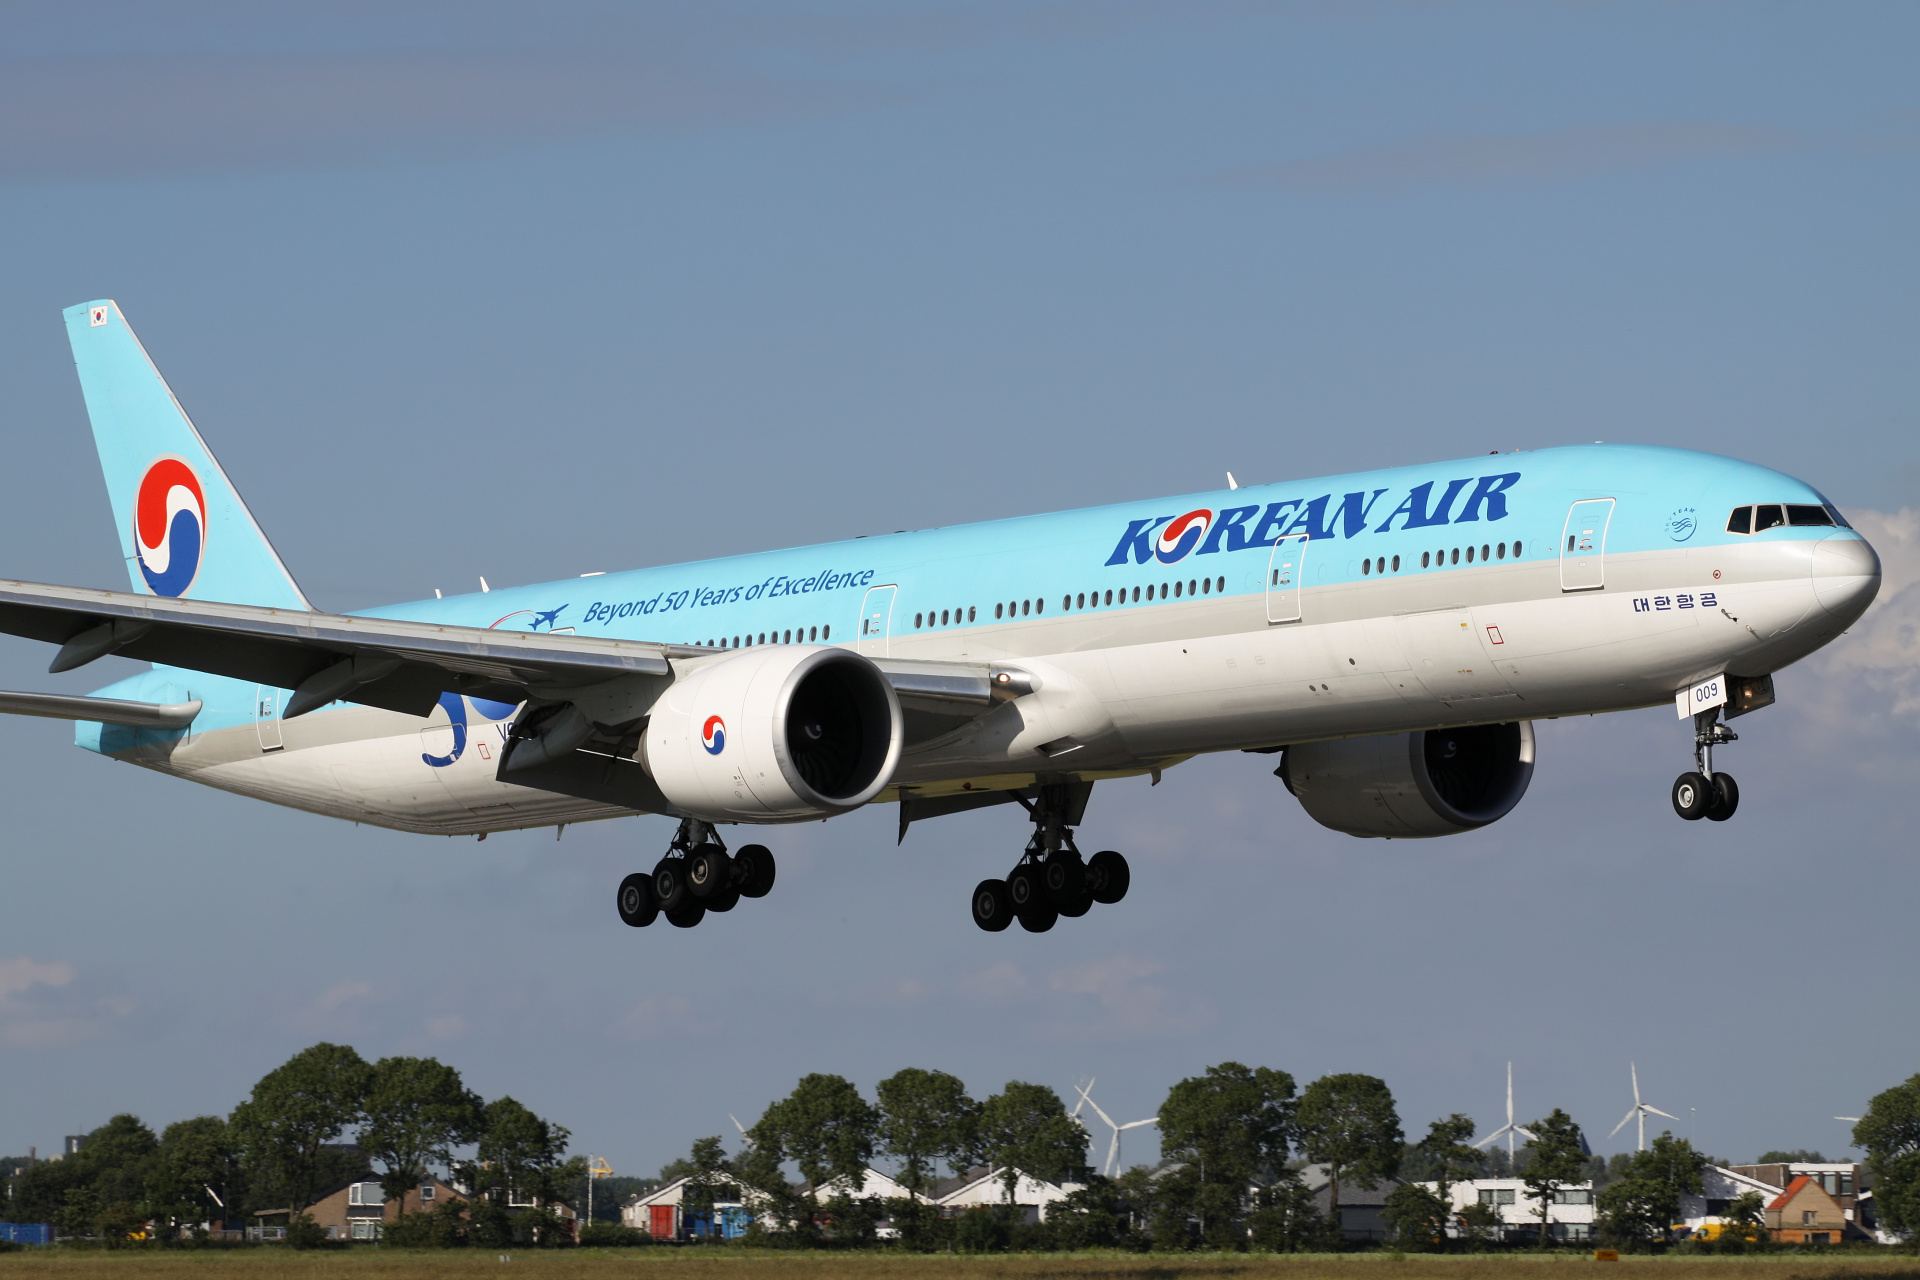 HL8009, Korean Air Lines (Beyond 50 Years of Excellence livery) (Aircraft » Schiphol Spotting » Boeing 777-300ER)